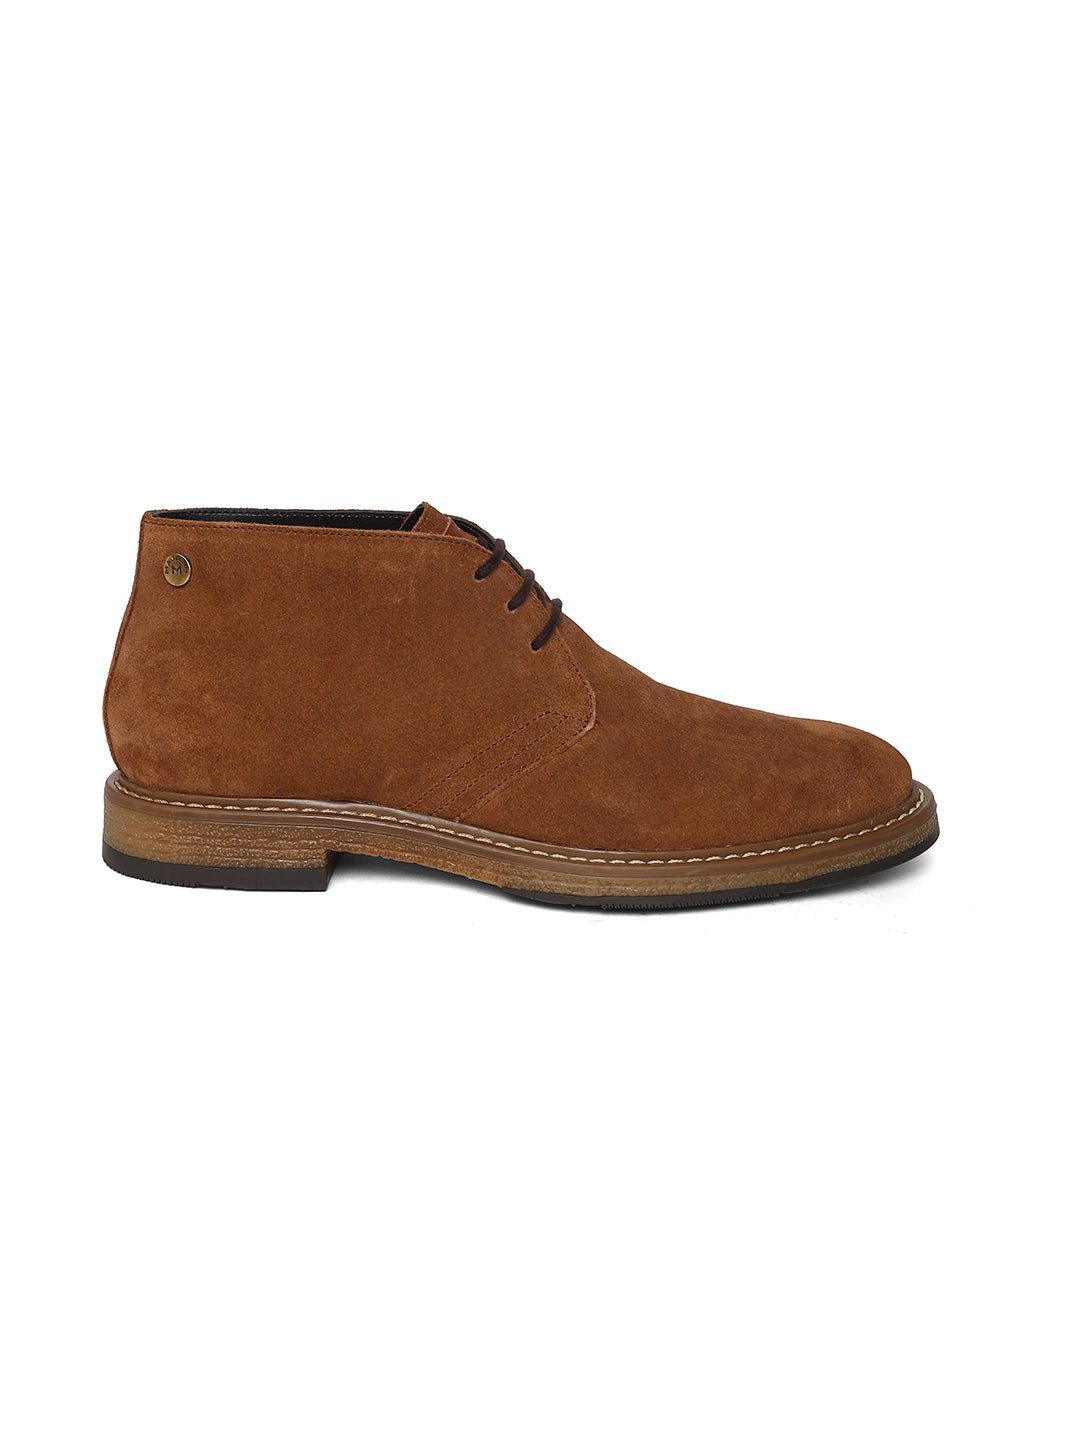 Tan Genuine Suede Leather Chukka Lace Up Boots For Men